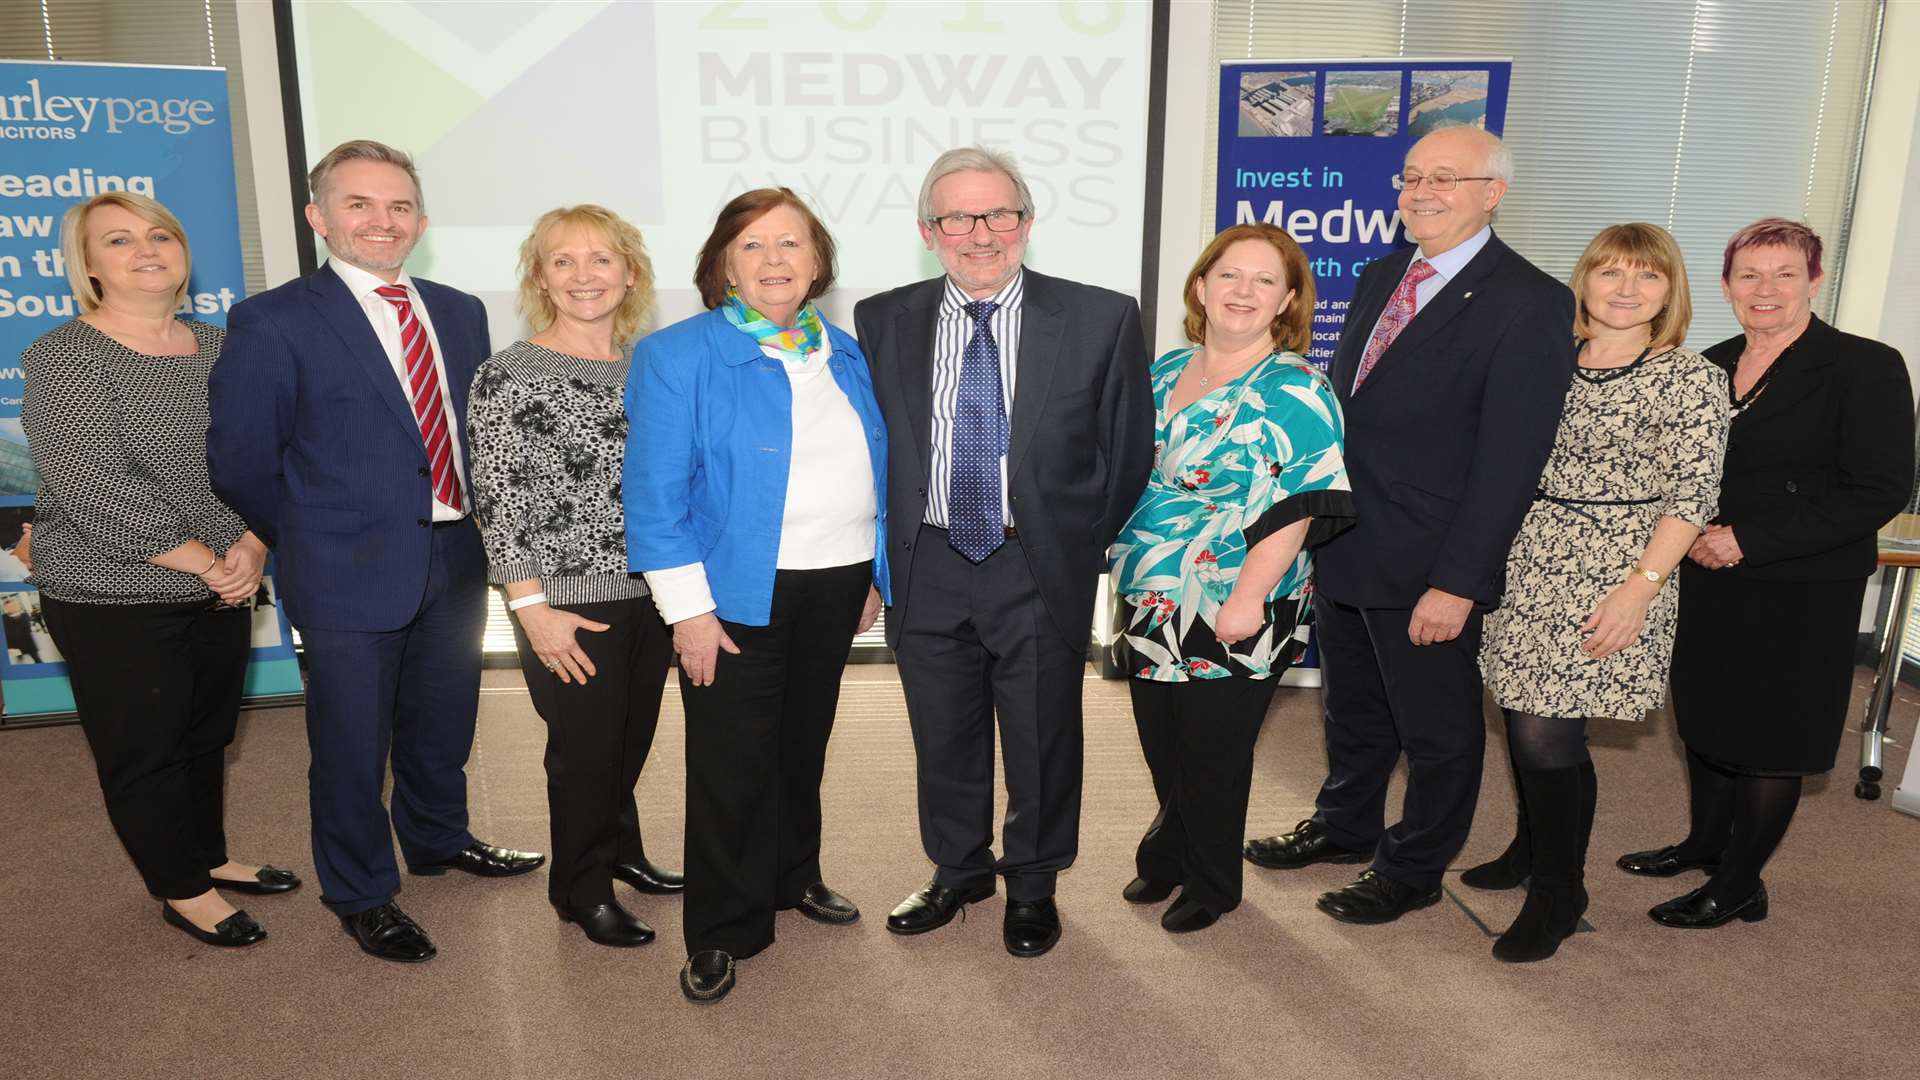 Launch of the 2016 Medway Business Awards